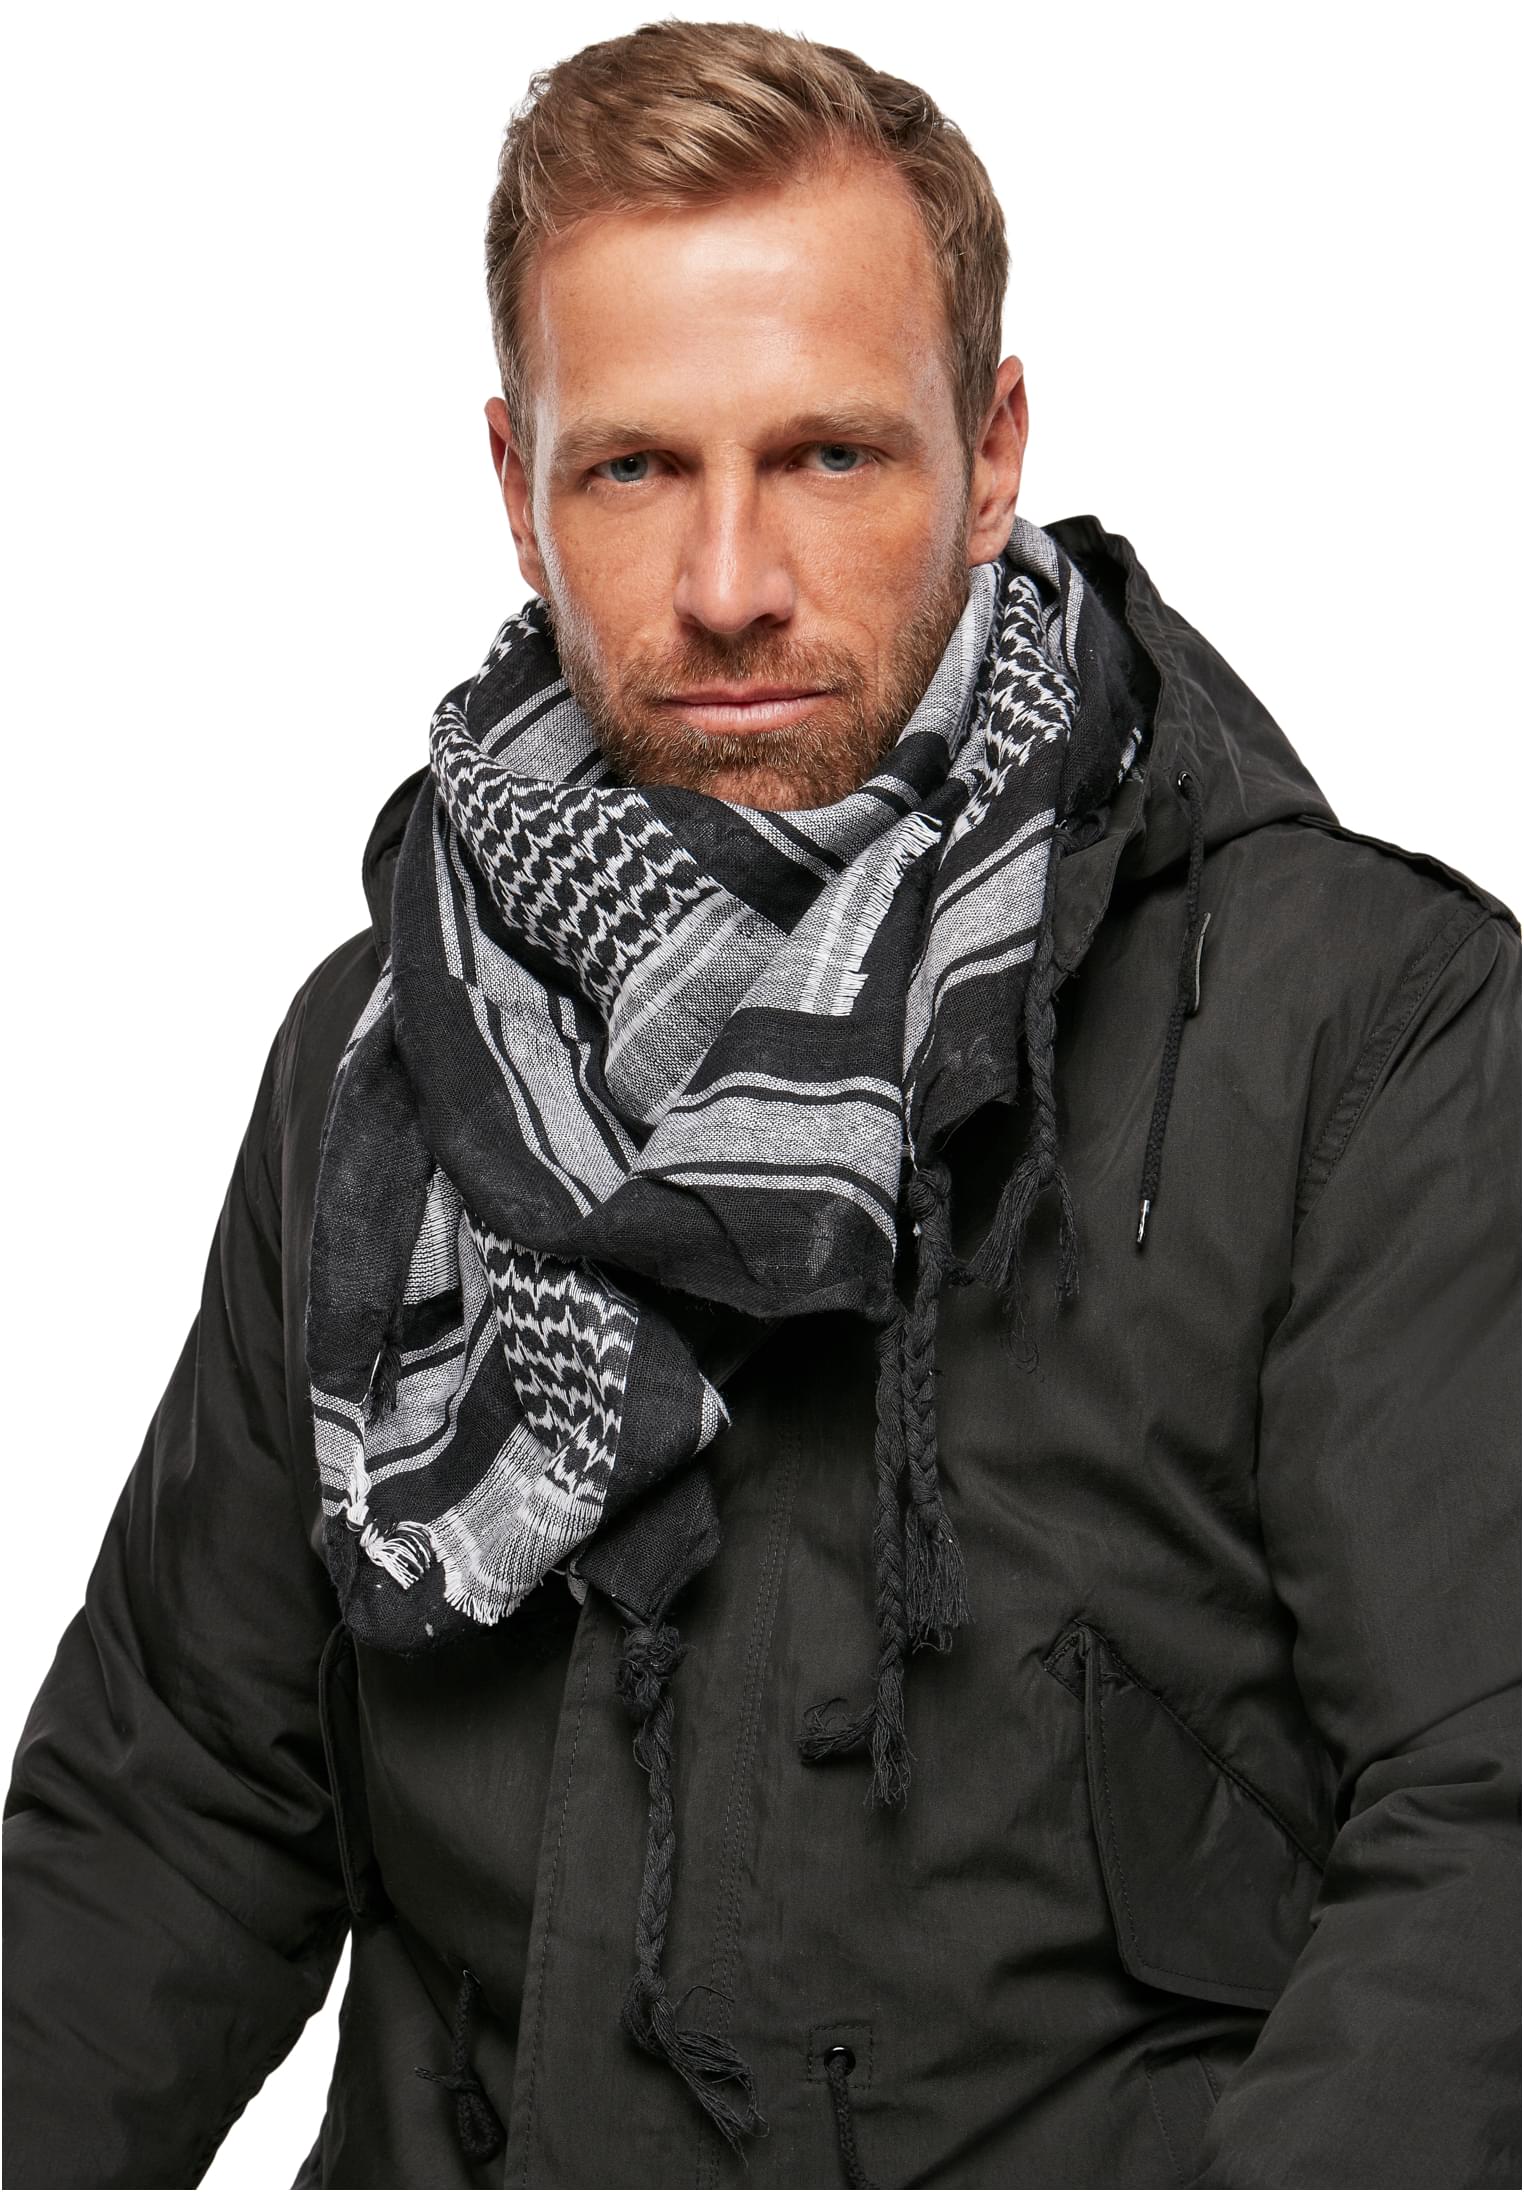 Accessoires Shemag Scarf in Farbe black/white